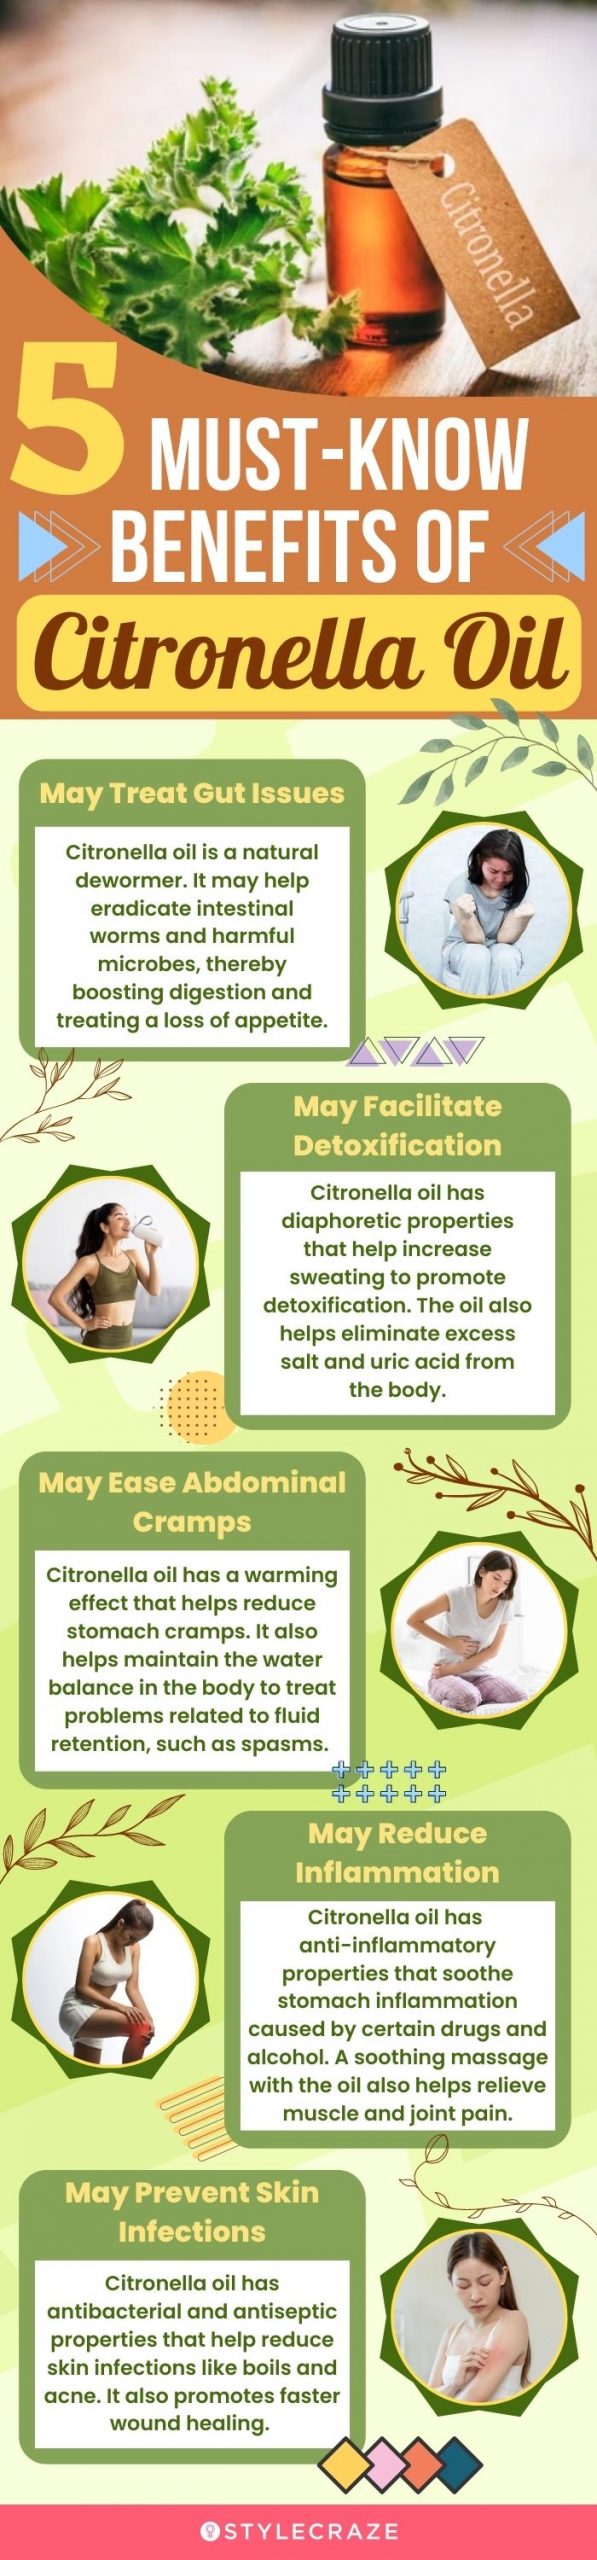 5 must-know benefits of citronella oil (infographic)